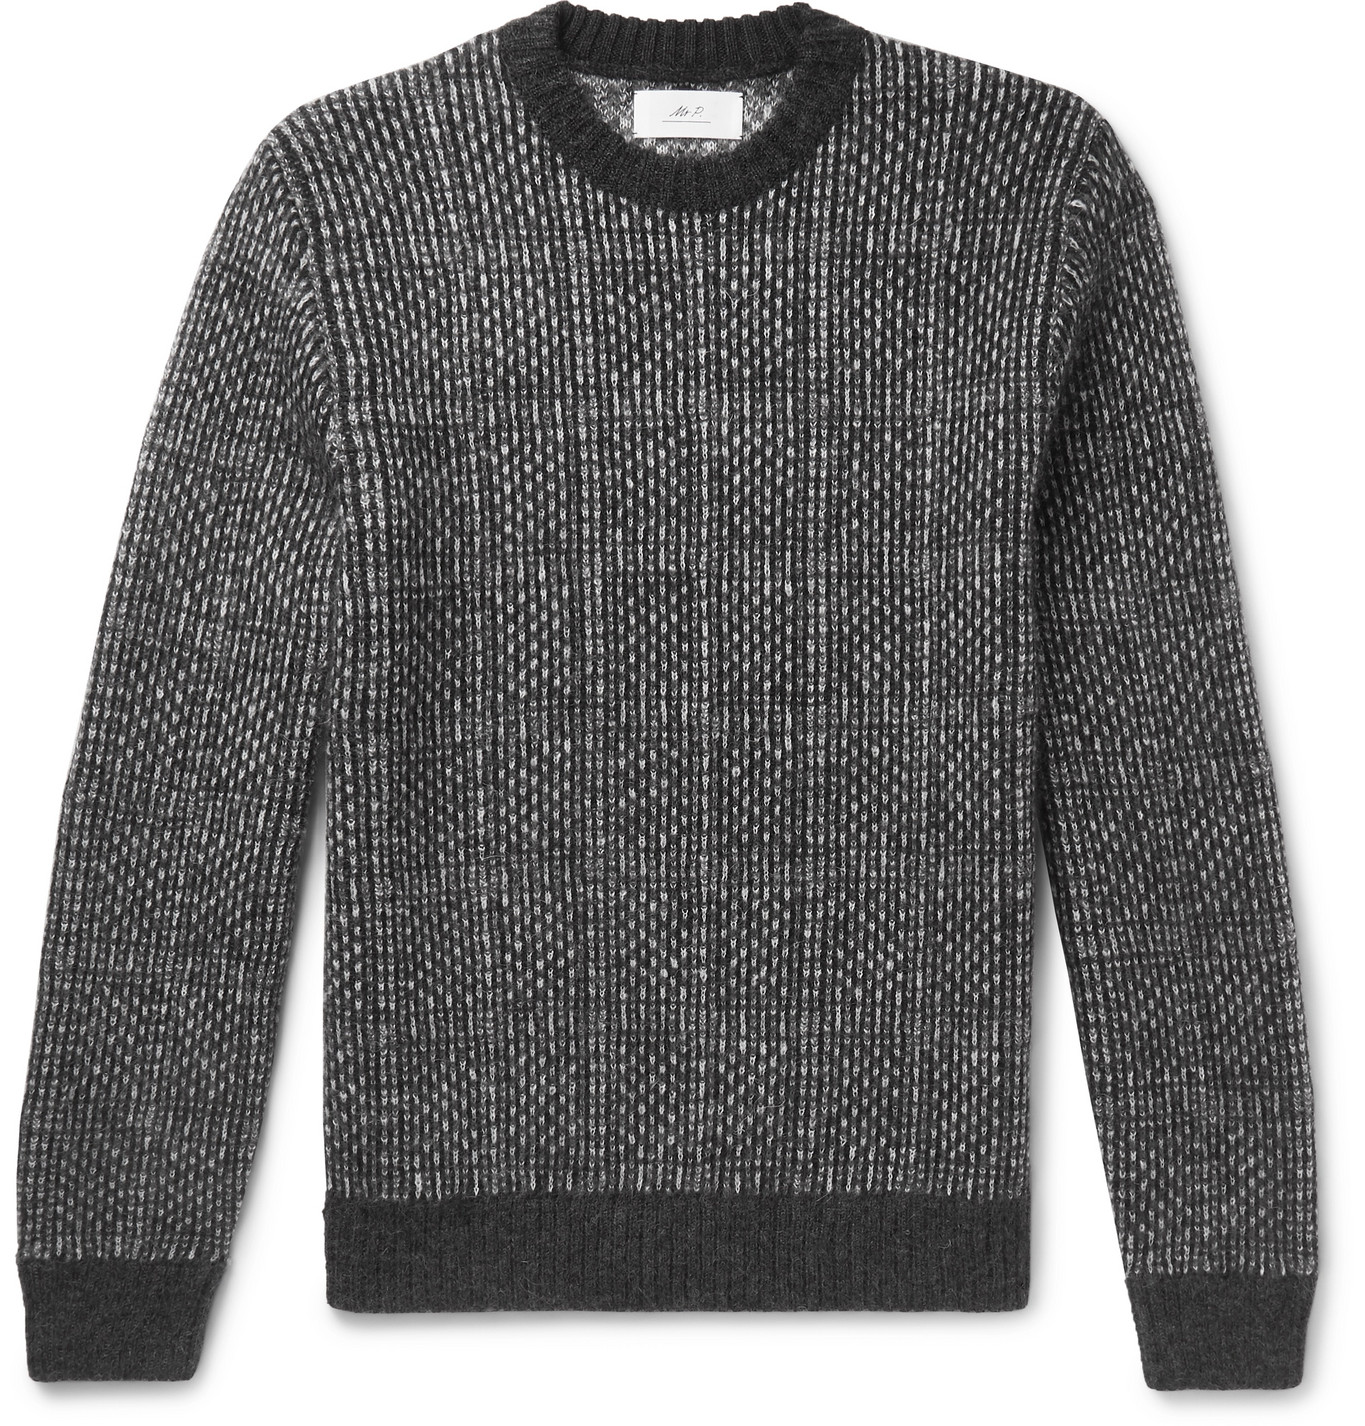 Mr P. - Checked Knitted Sweater - Men - Gray | The Fashionisto